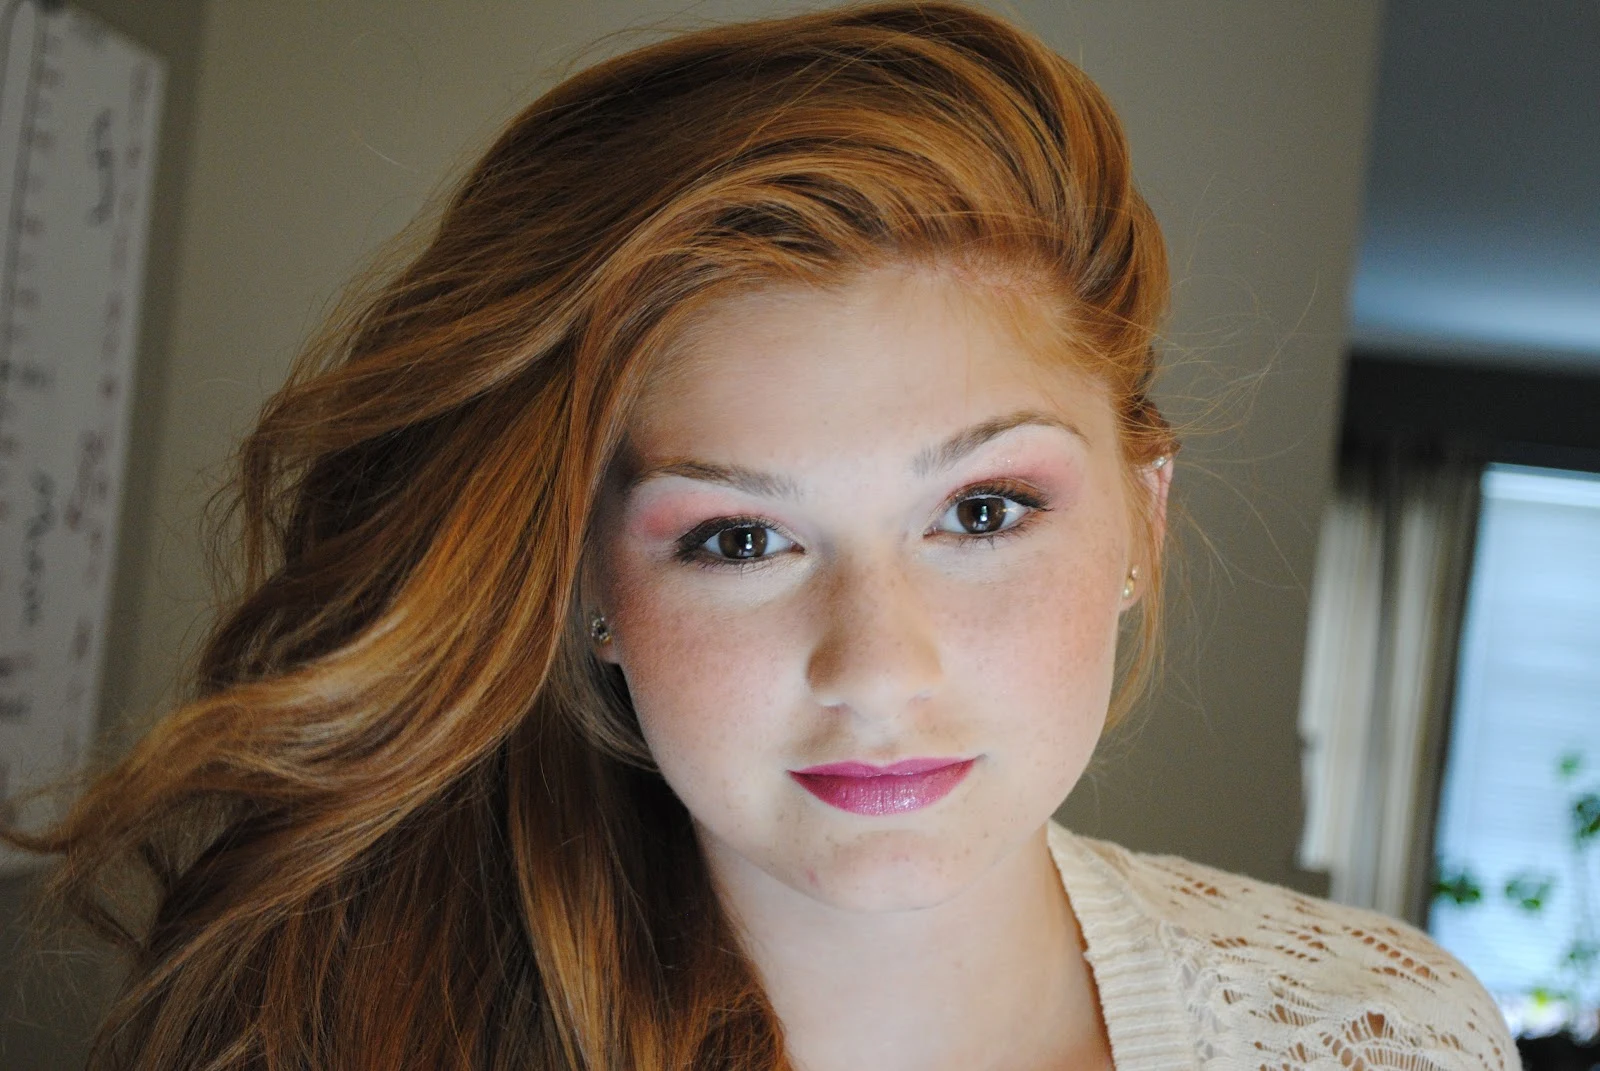 Lizzie Loves Makeup Makeup For Redheads Full Face Tutorial